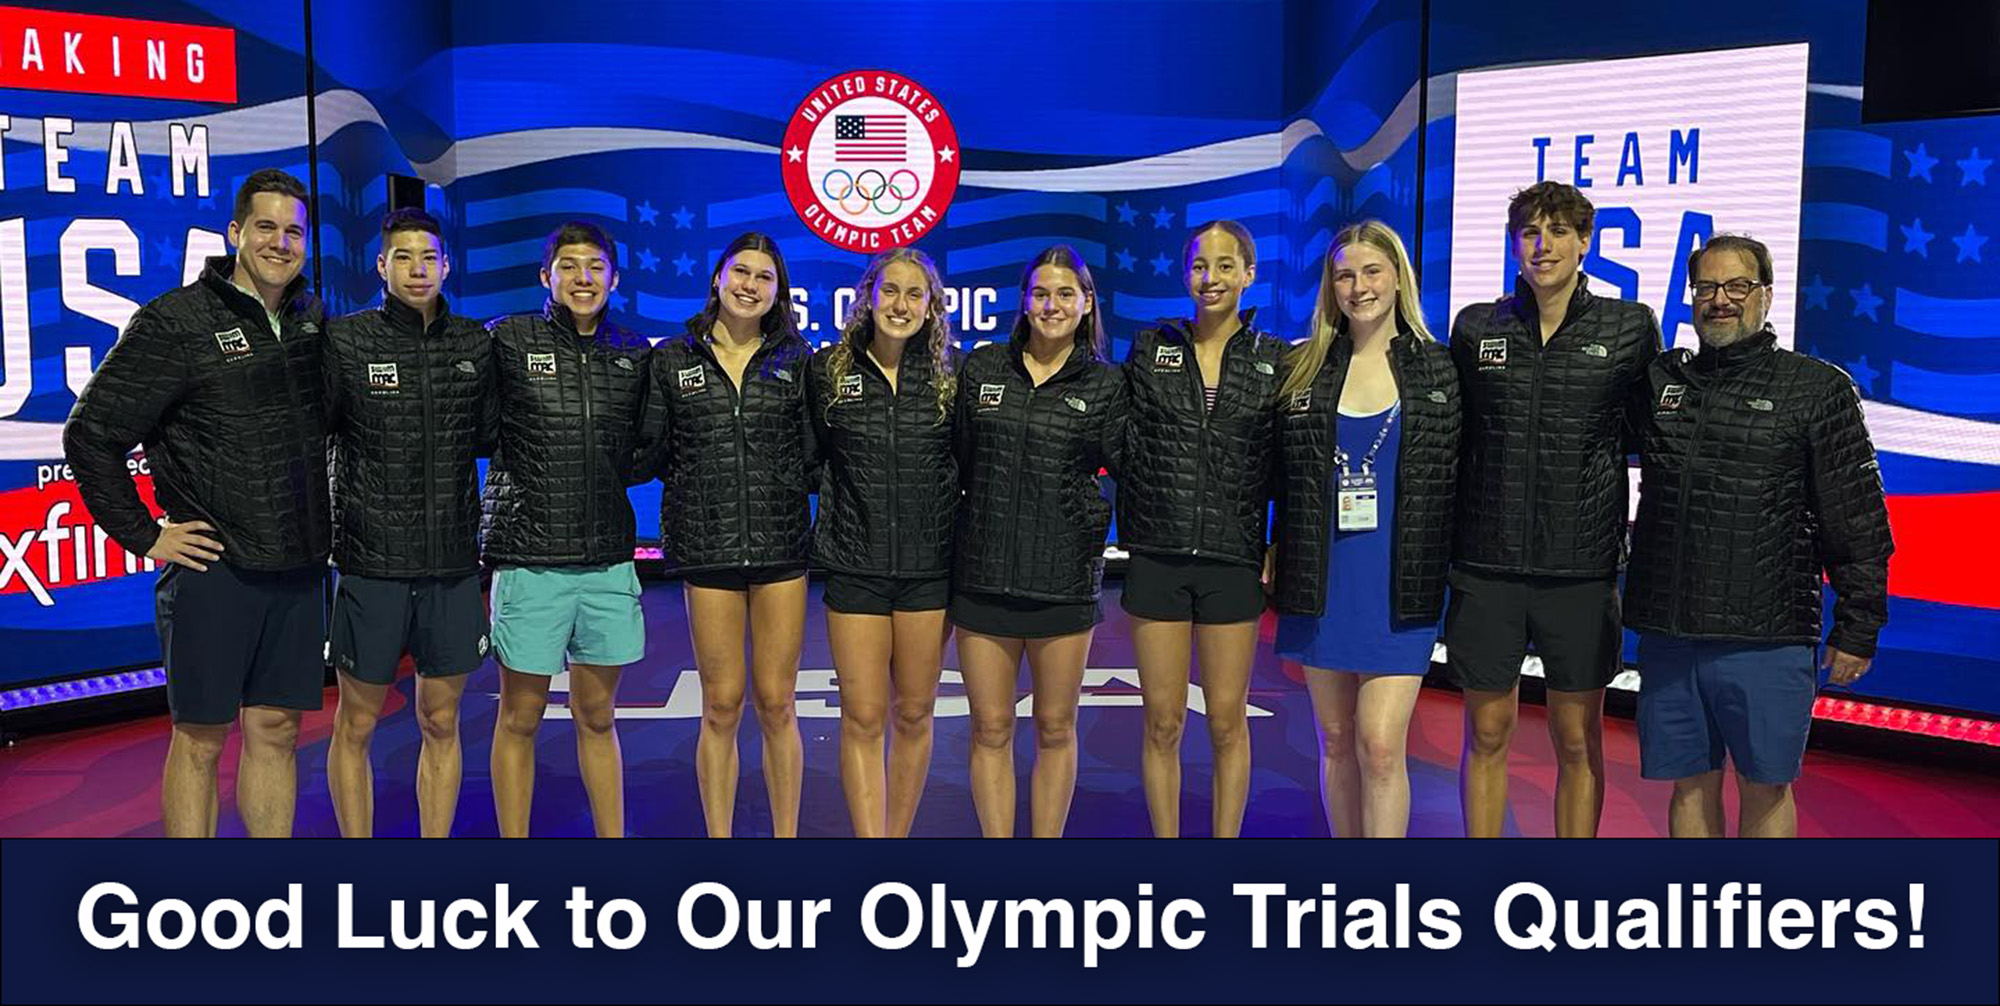 Good Luck to Our Olympic Trials Qualifiers!